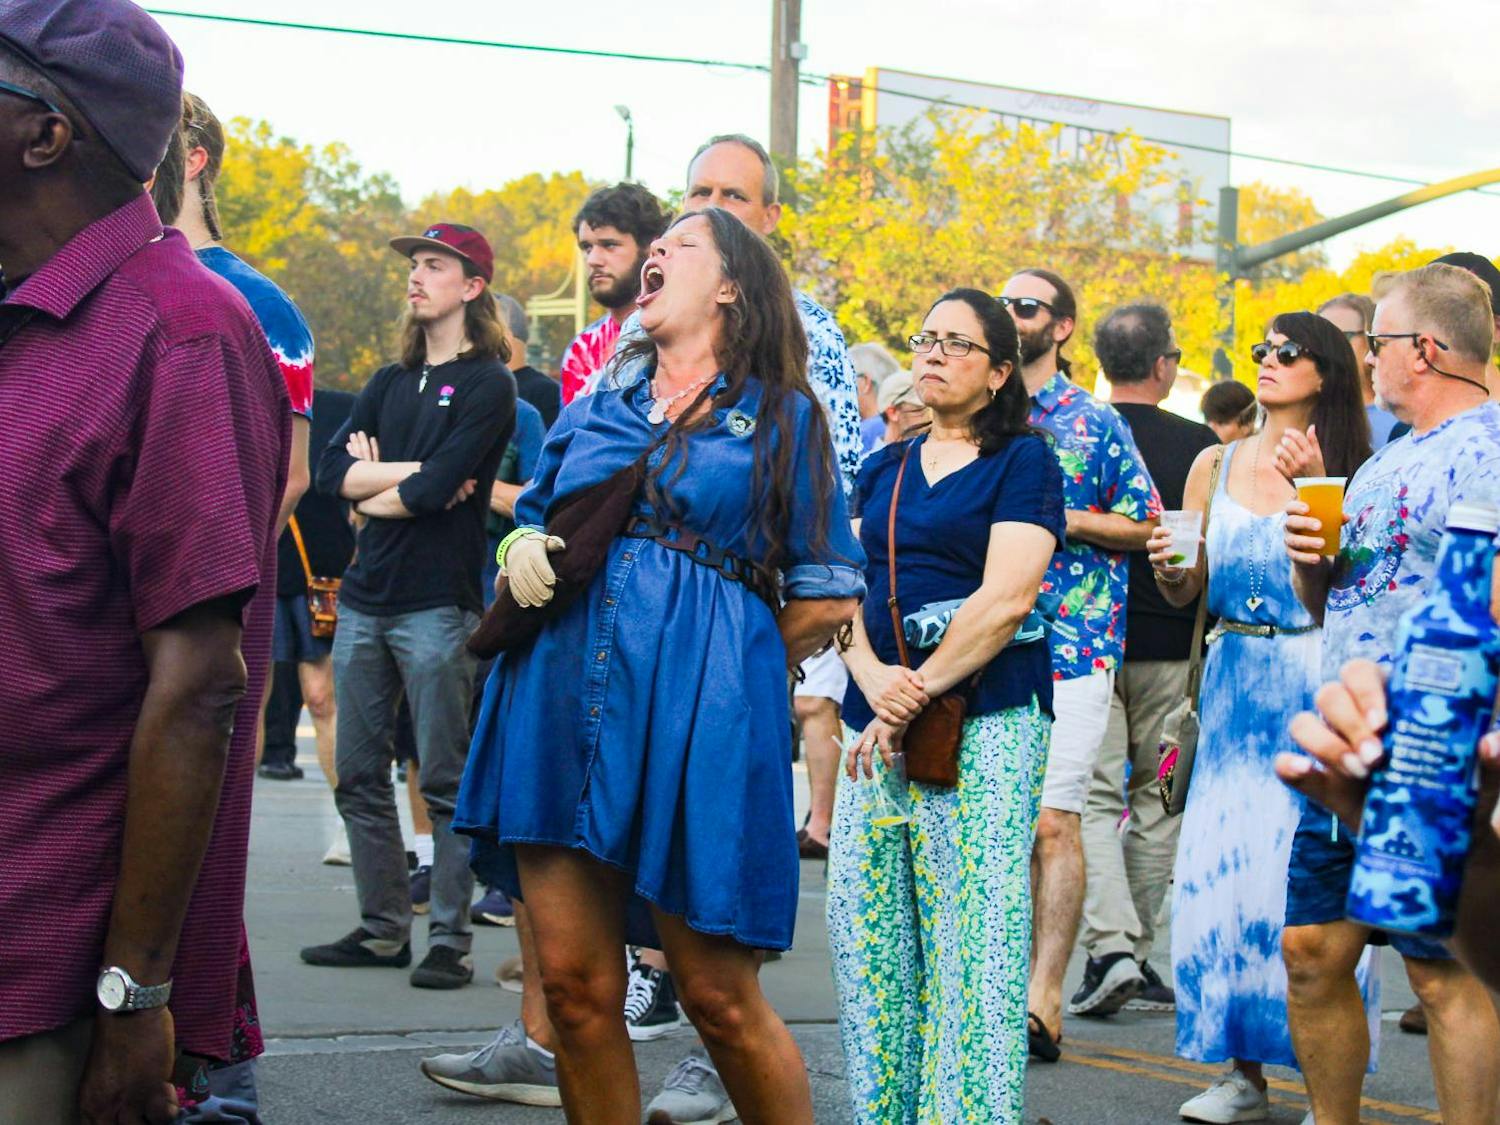 Kelly Fenech sings along to the band Ten Mile Ride at Five Points' annual JerryFest. The Grateful Dead and Jerry Garcia tribute festival took place on Oct. 1, 2023.